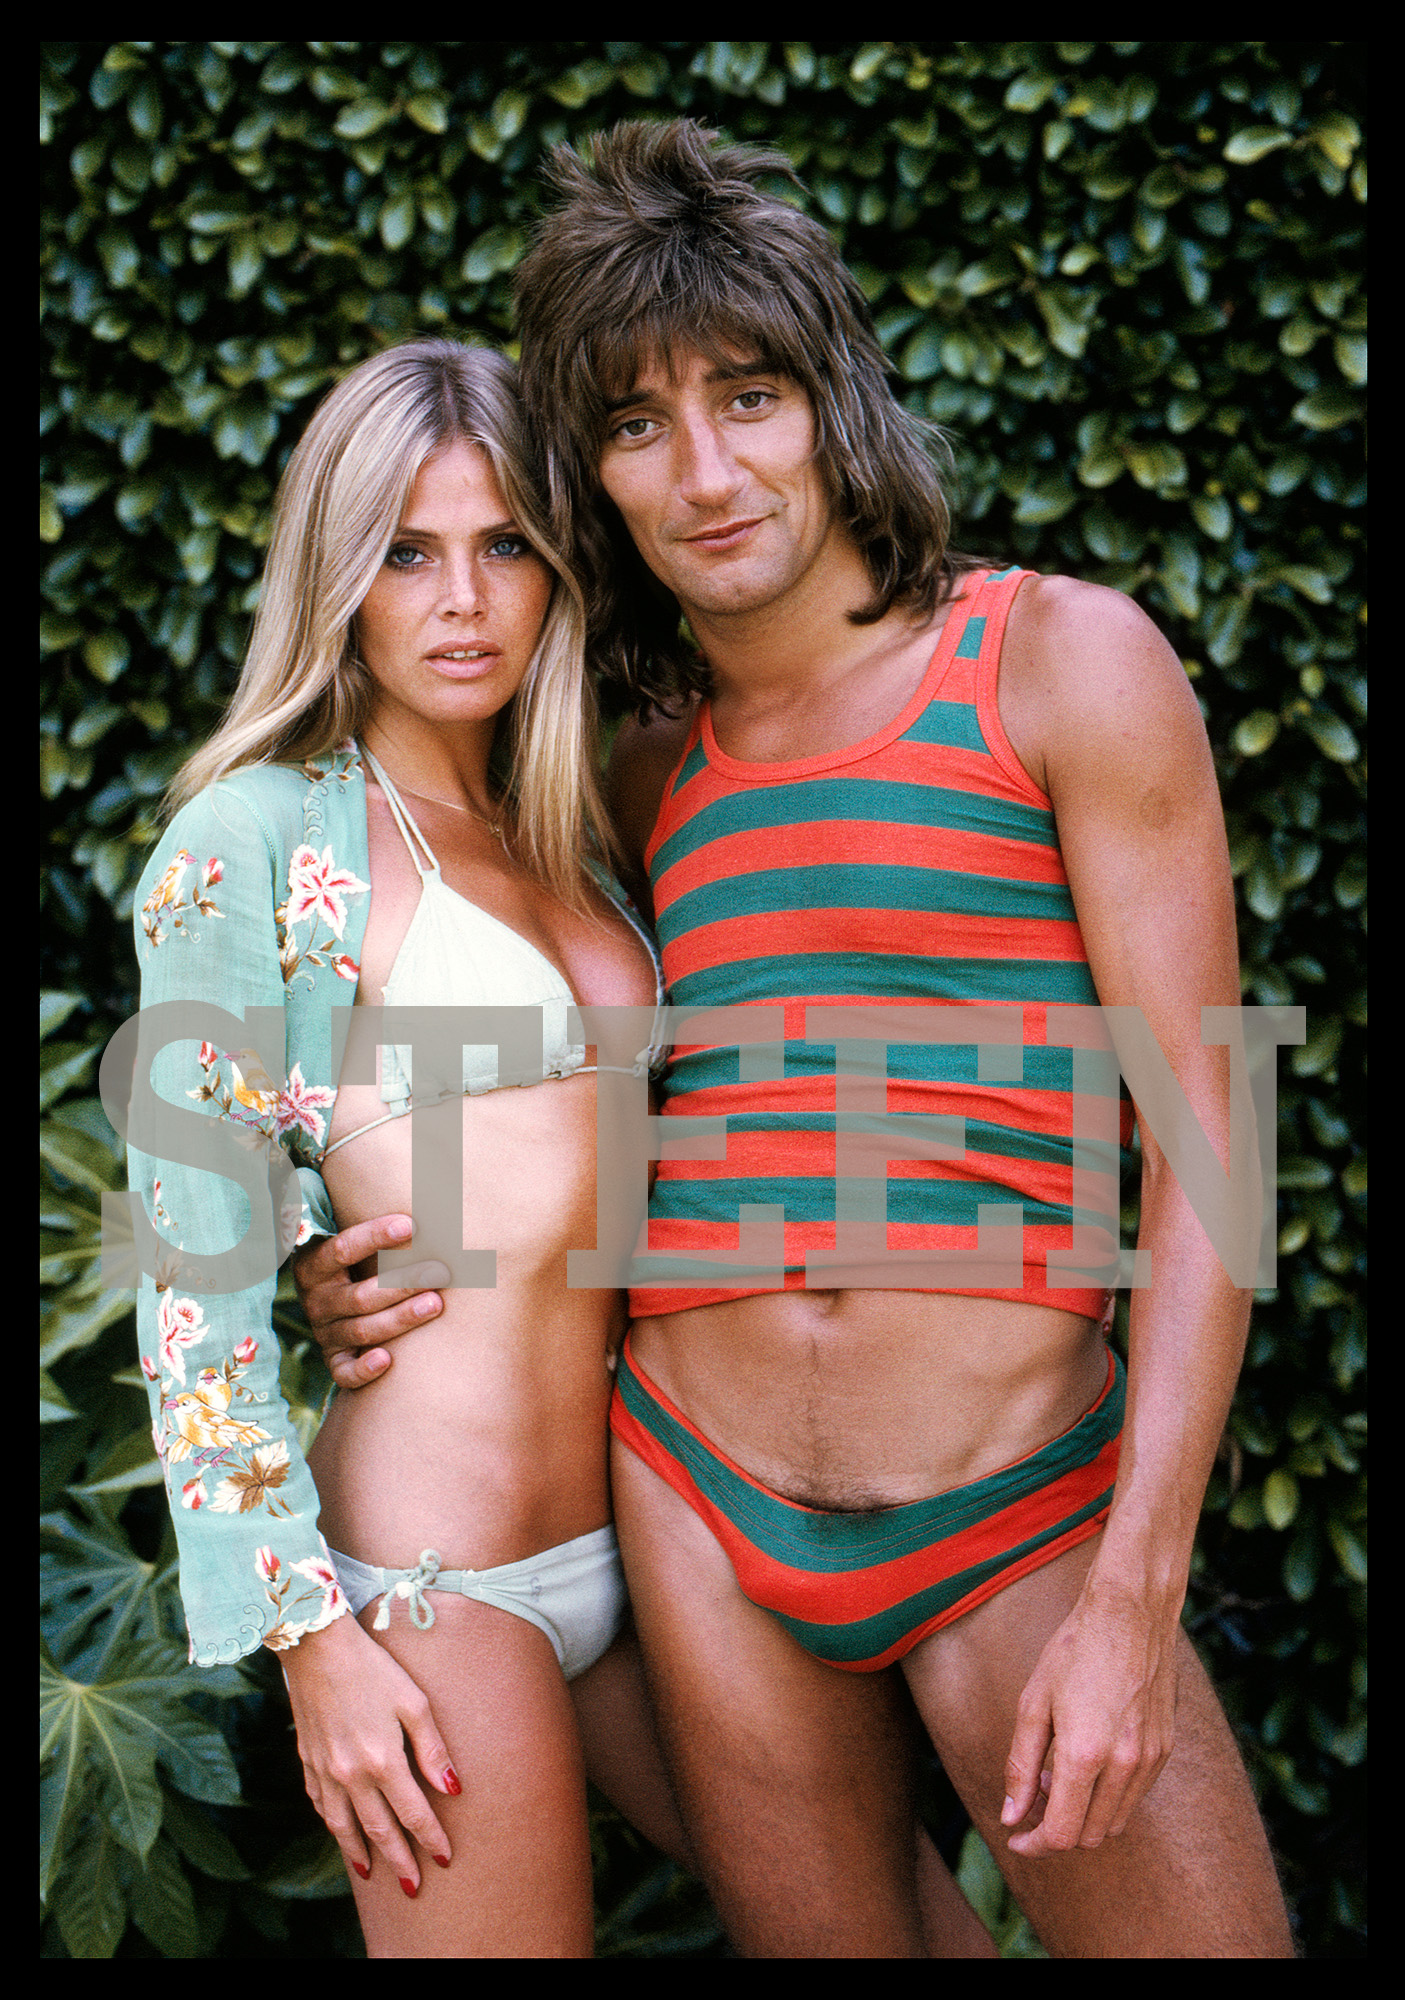 an exclusive limited edition colour photograph of rod stewart and britt ekland in swimwear by british photographer david steen